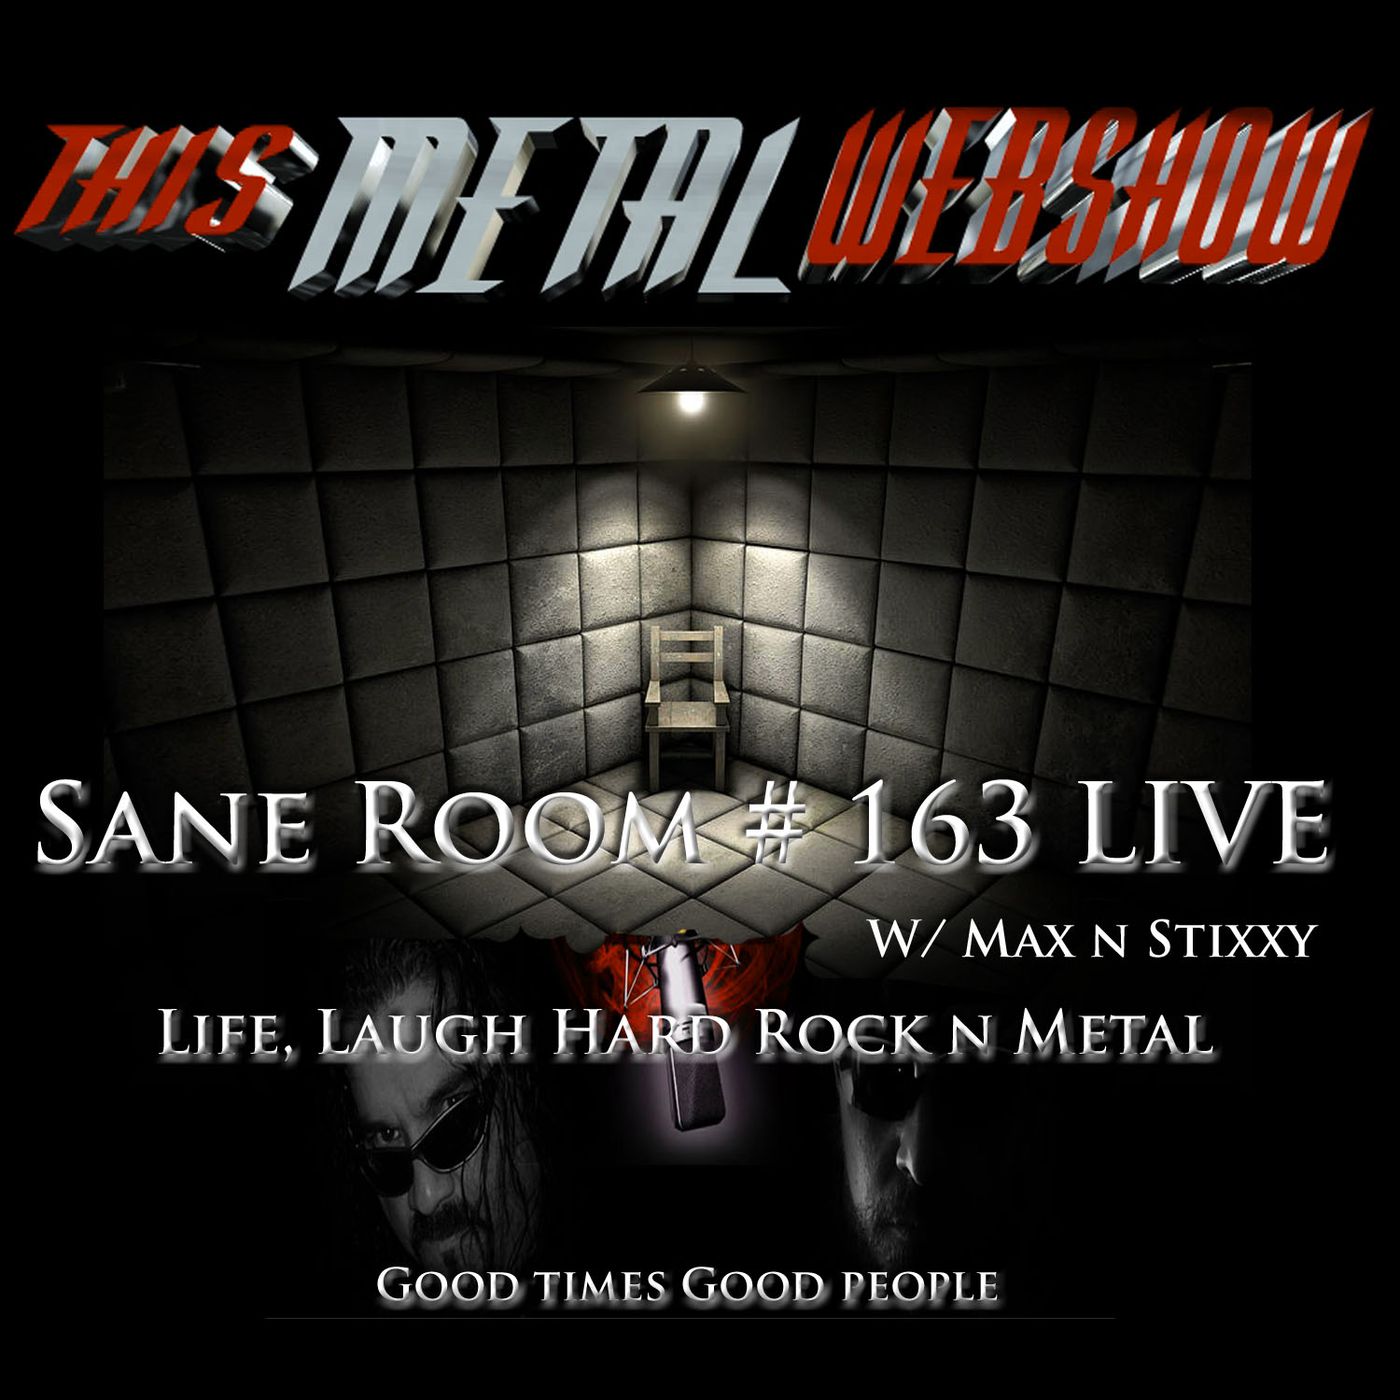 This Metal Webshow Sane Room # 163 LIVE